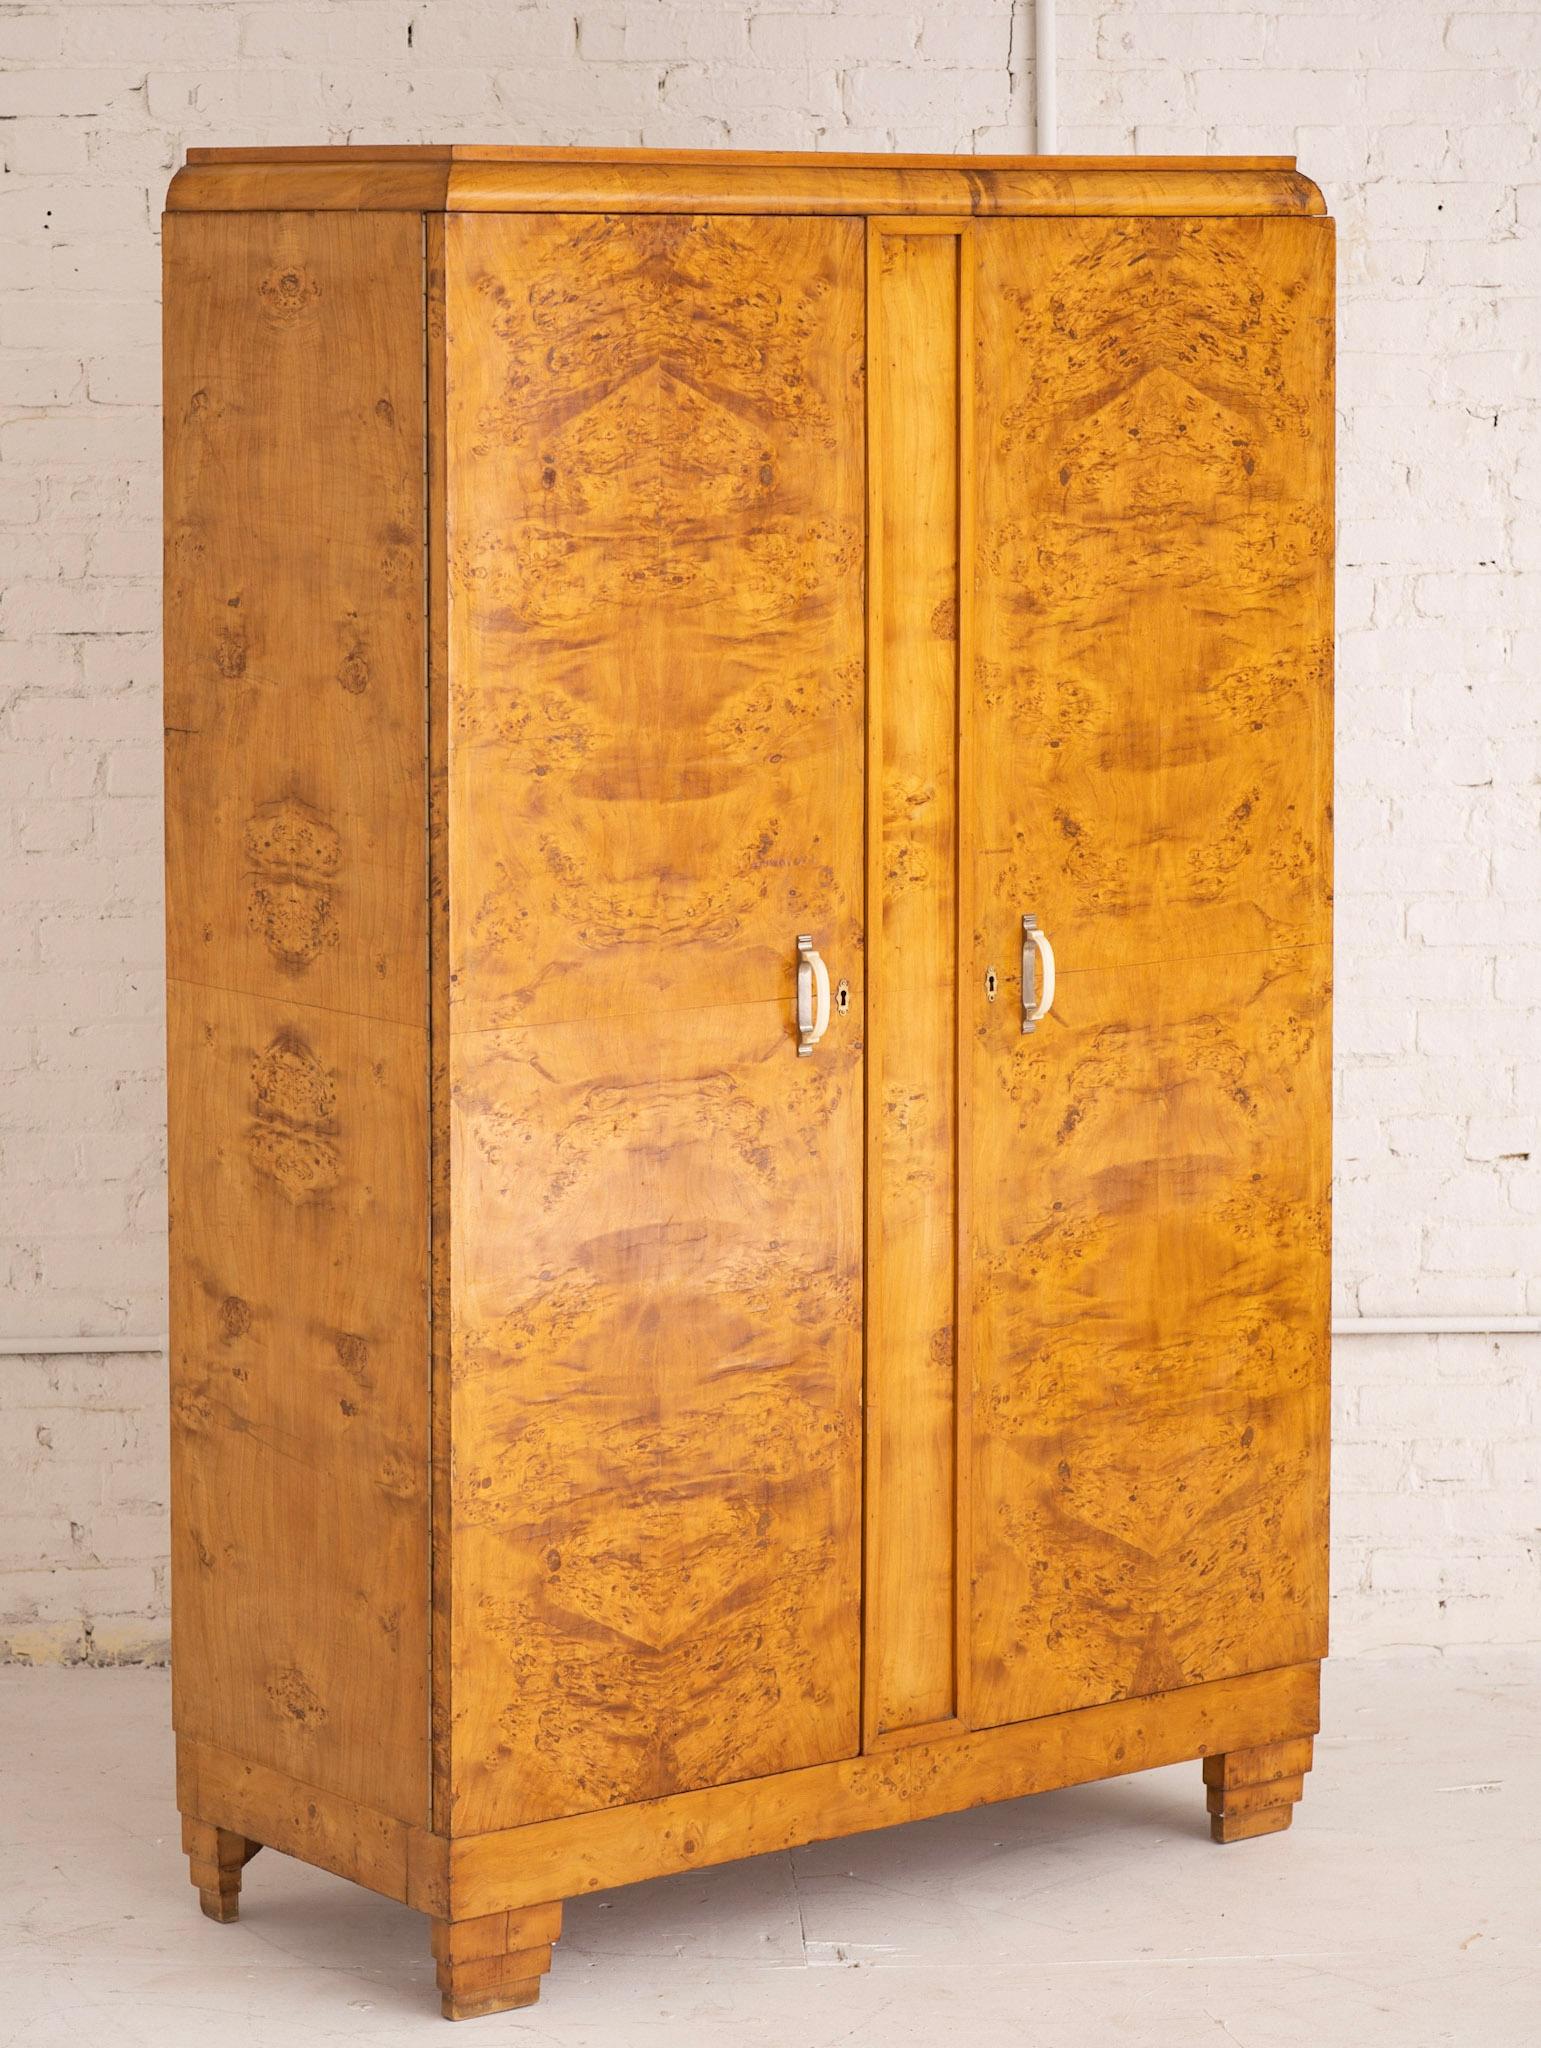 1930s Art Deco burl wood wardrobe. Sourced in Italy. Wardrobe features two lower inner shelves and upper clothes bar. Celluloid handles. Key not included.